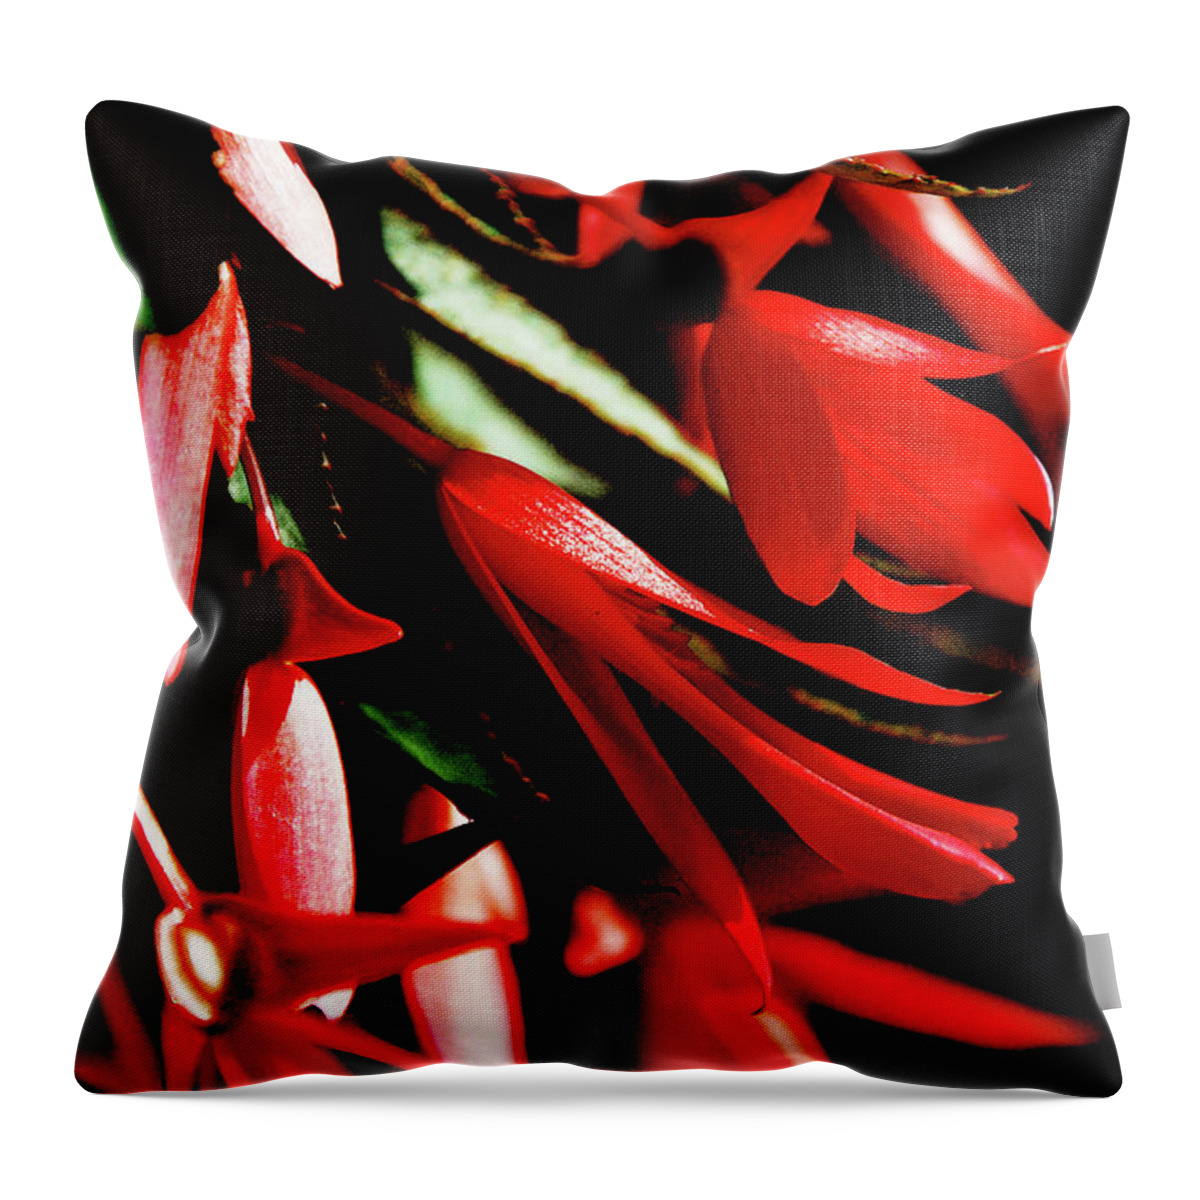 Floral Throw Pillow featuring the photograph Coral Beauty by Simone Hester